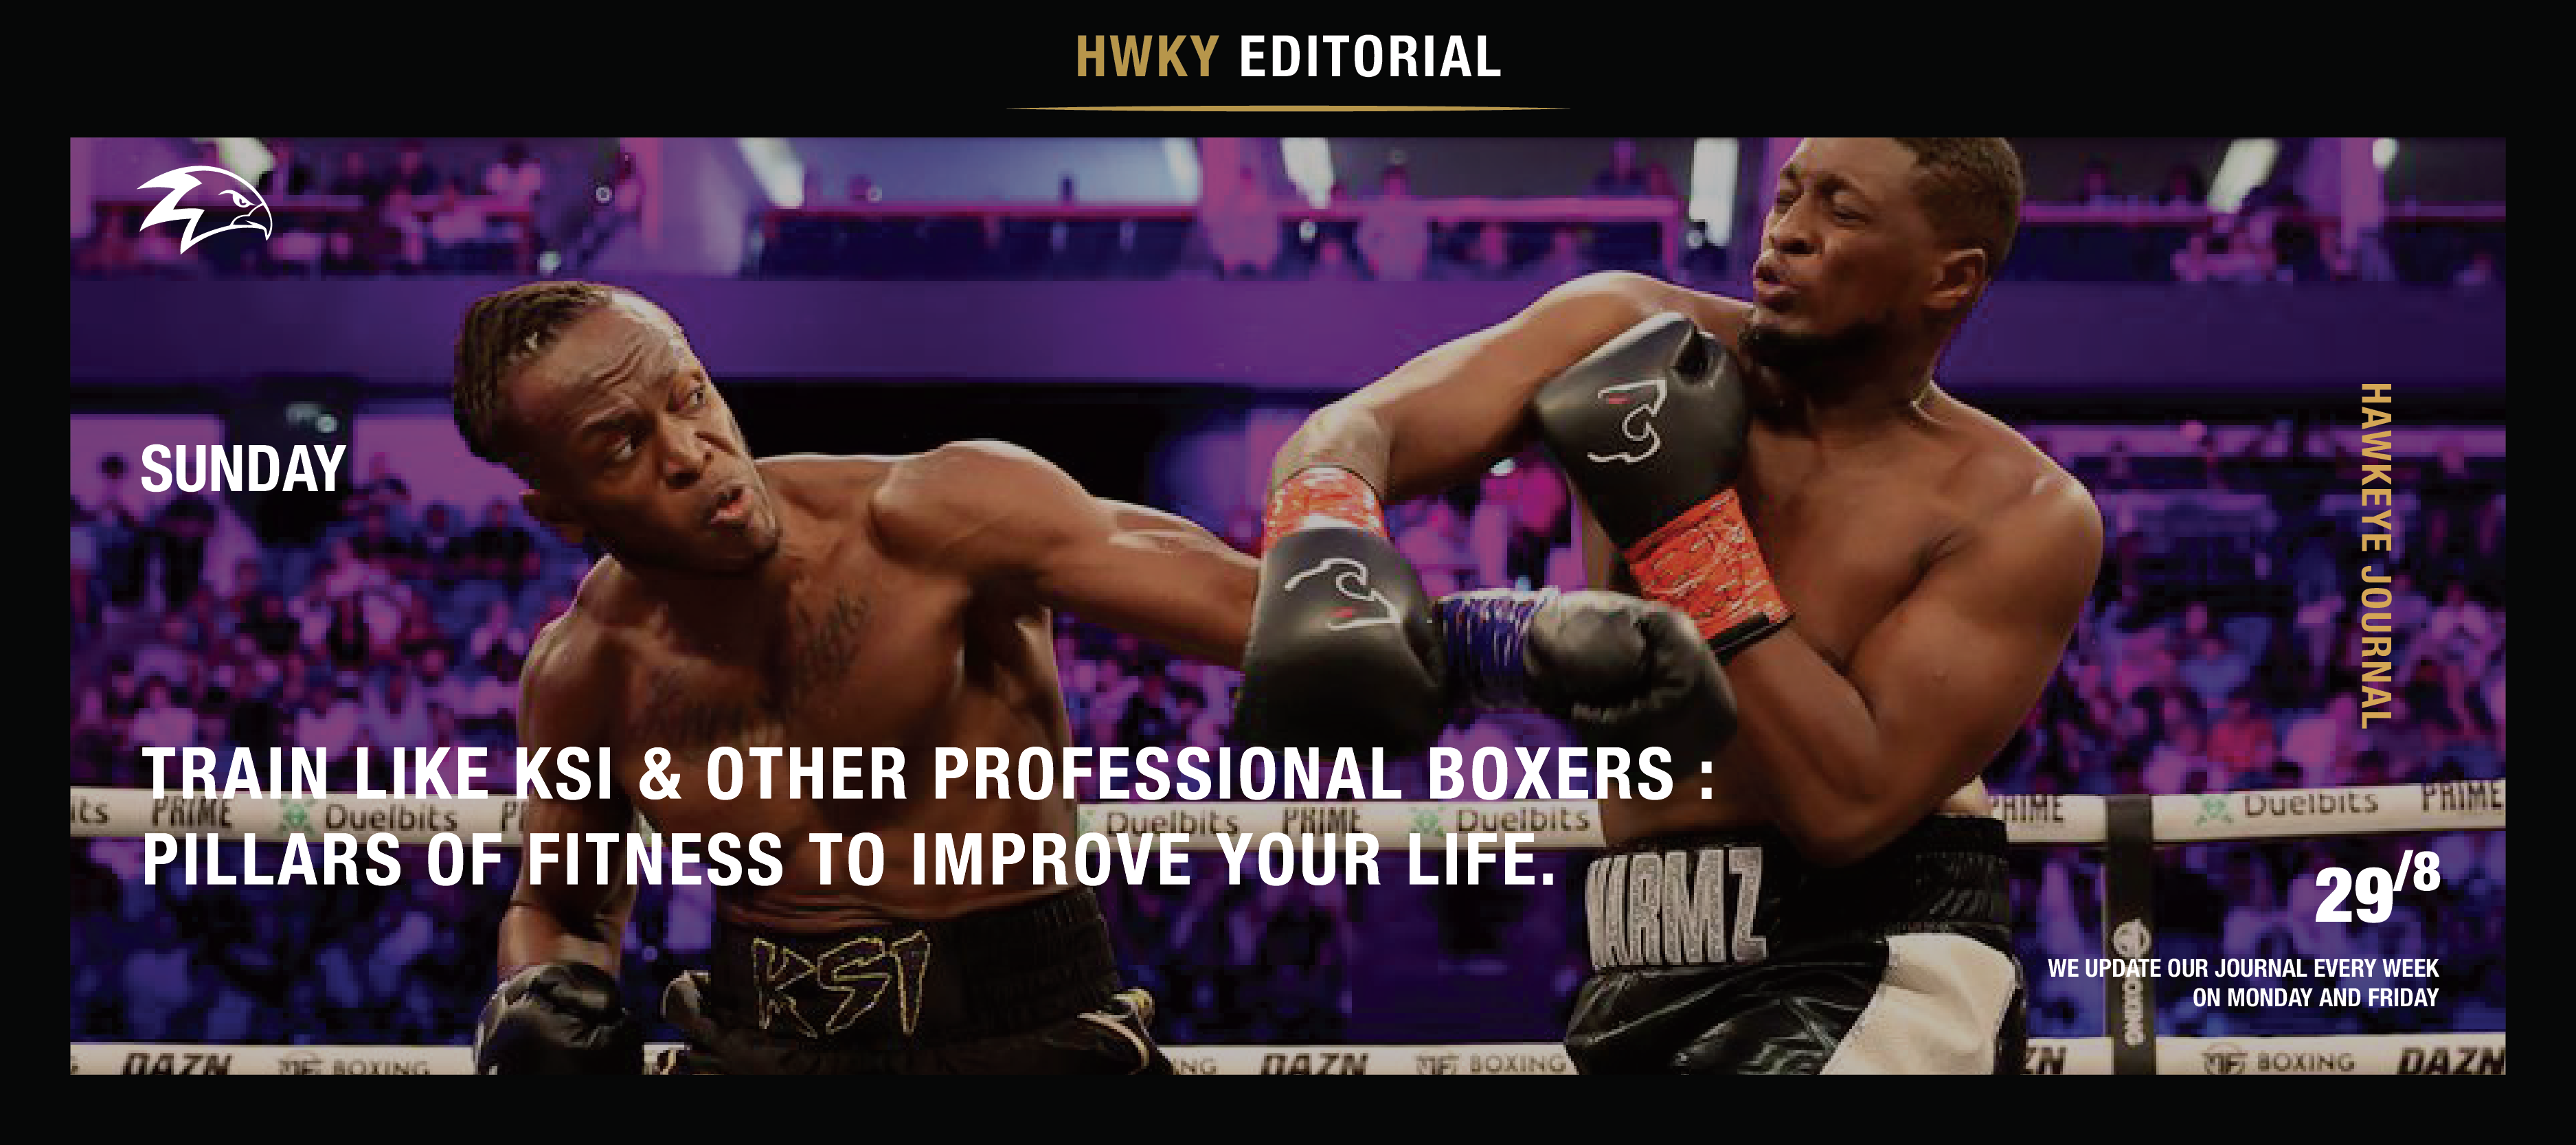 Train Like KSI & Other Professional Boxers : Pillars Of Fitness To Improve Your Life.